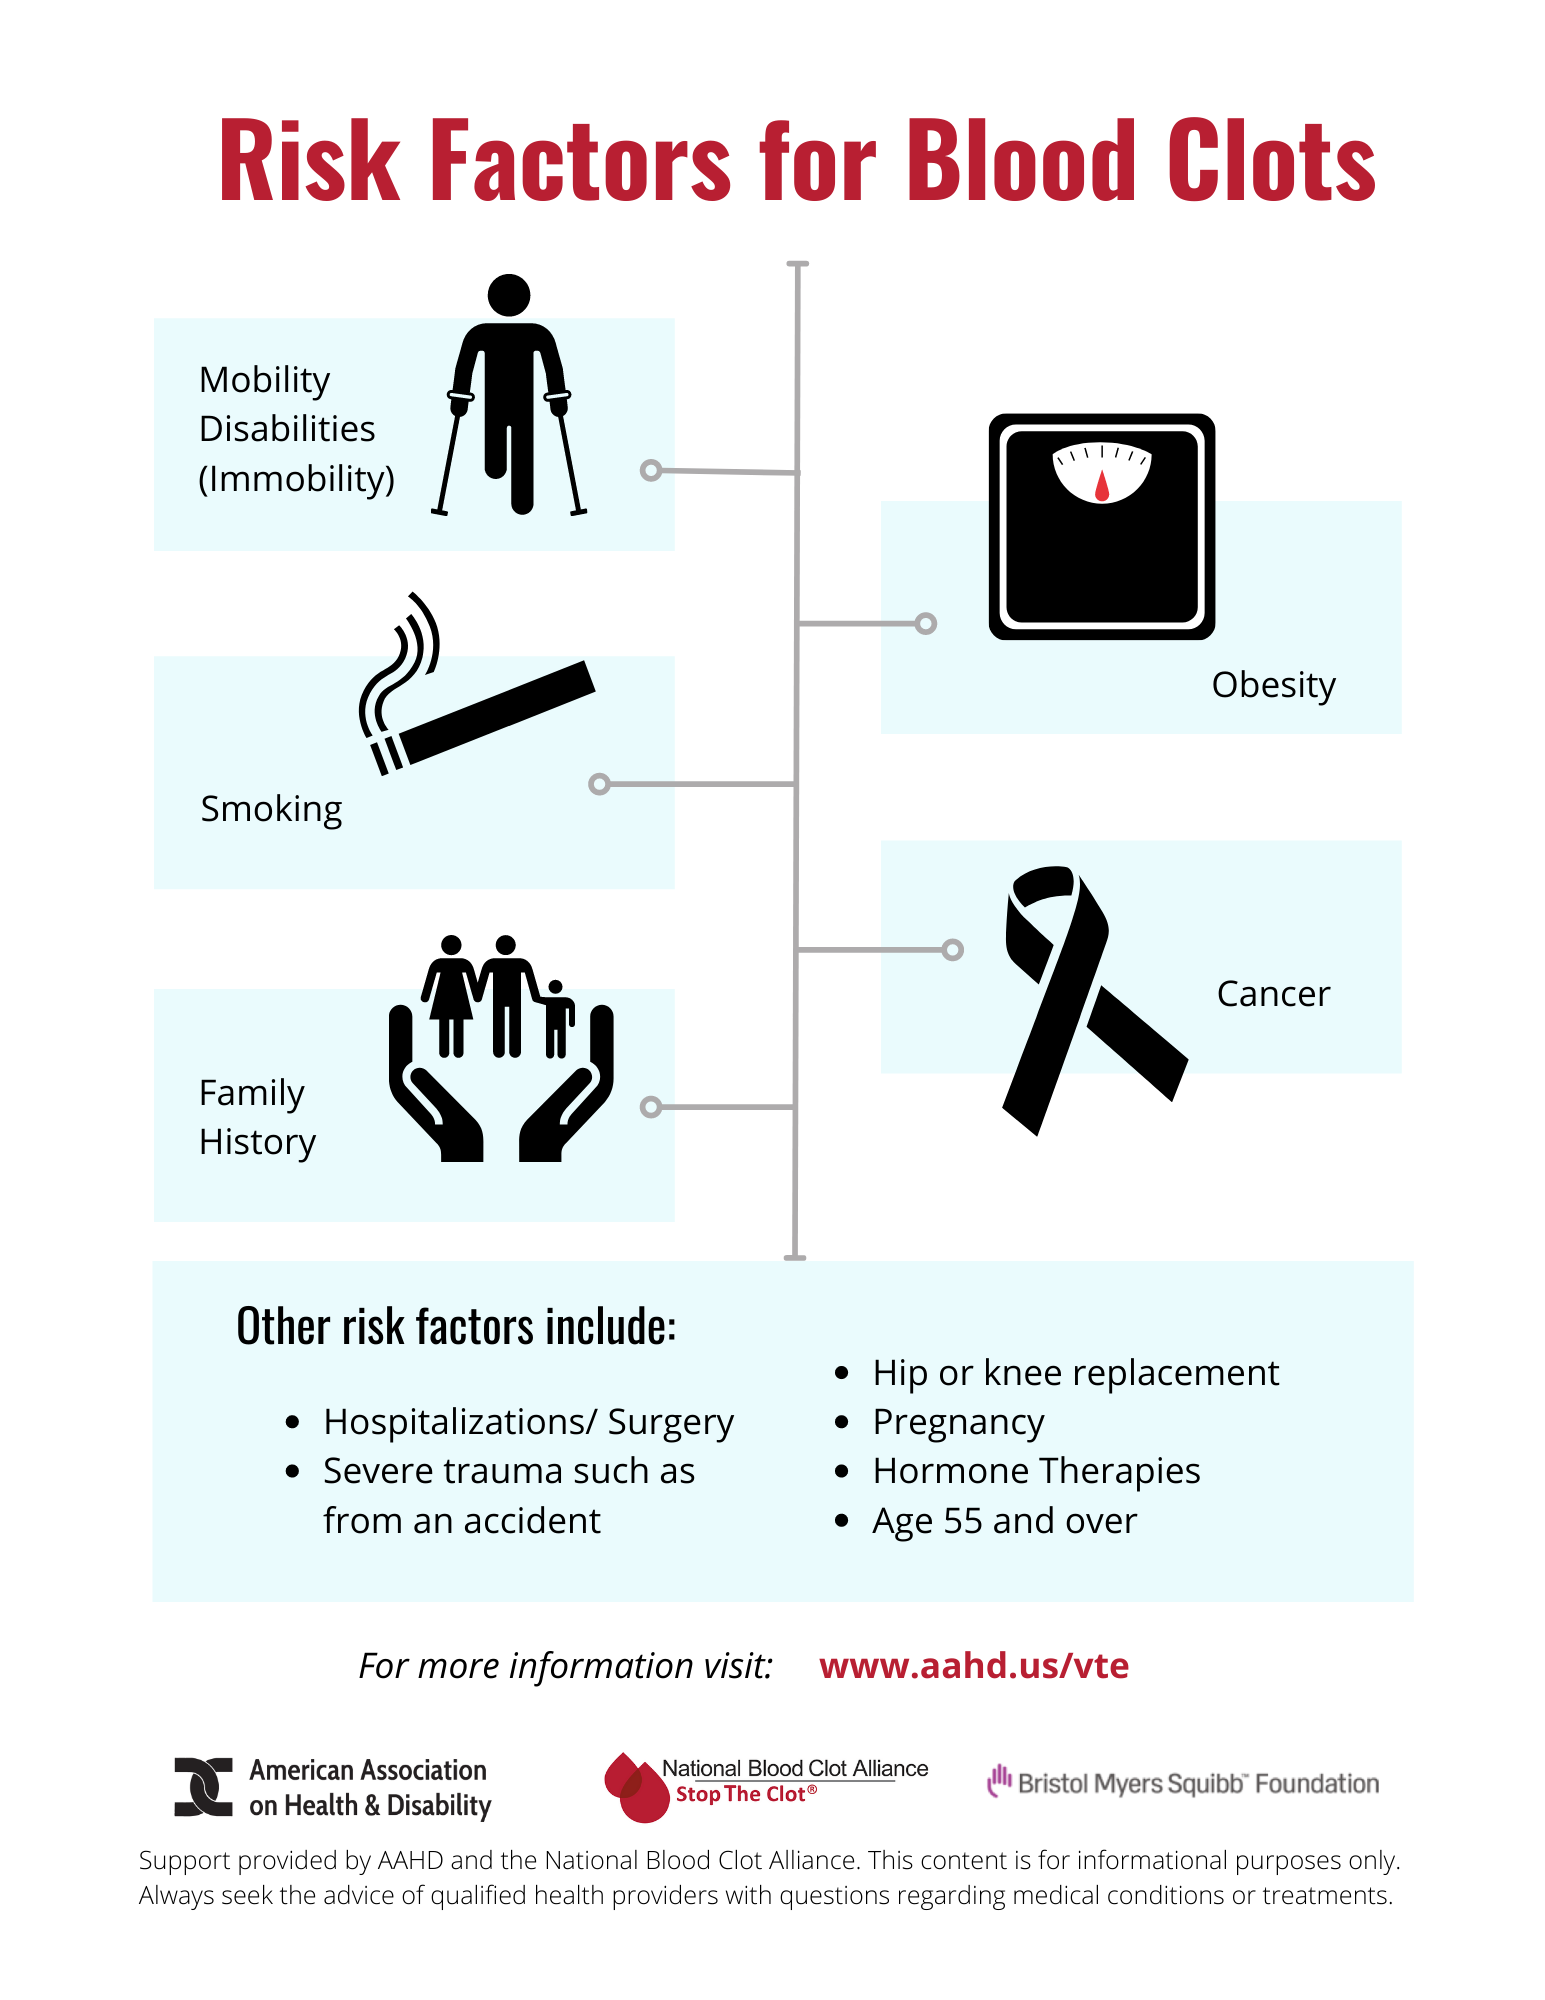 Infographic on Risk Factors for Blood Clots. Reads: Mobility Disabilities (Immobility); Obesity; Smoking; Cancer; Family History Other risk factors include: Hospitalizations/ Surgery; Severe trauma such as from an accident; Hip or knee replacement; Pregnancy; Hormone Therapies; Age 55 and over